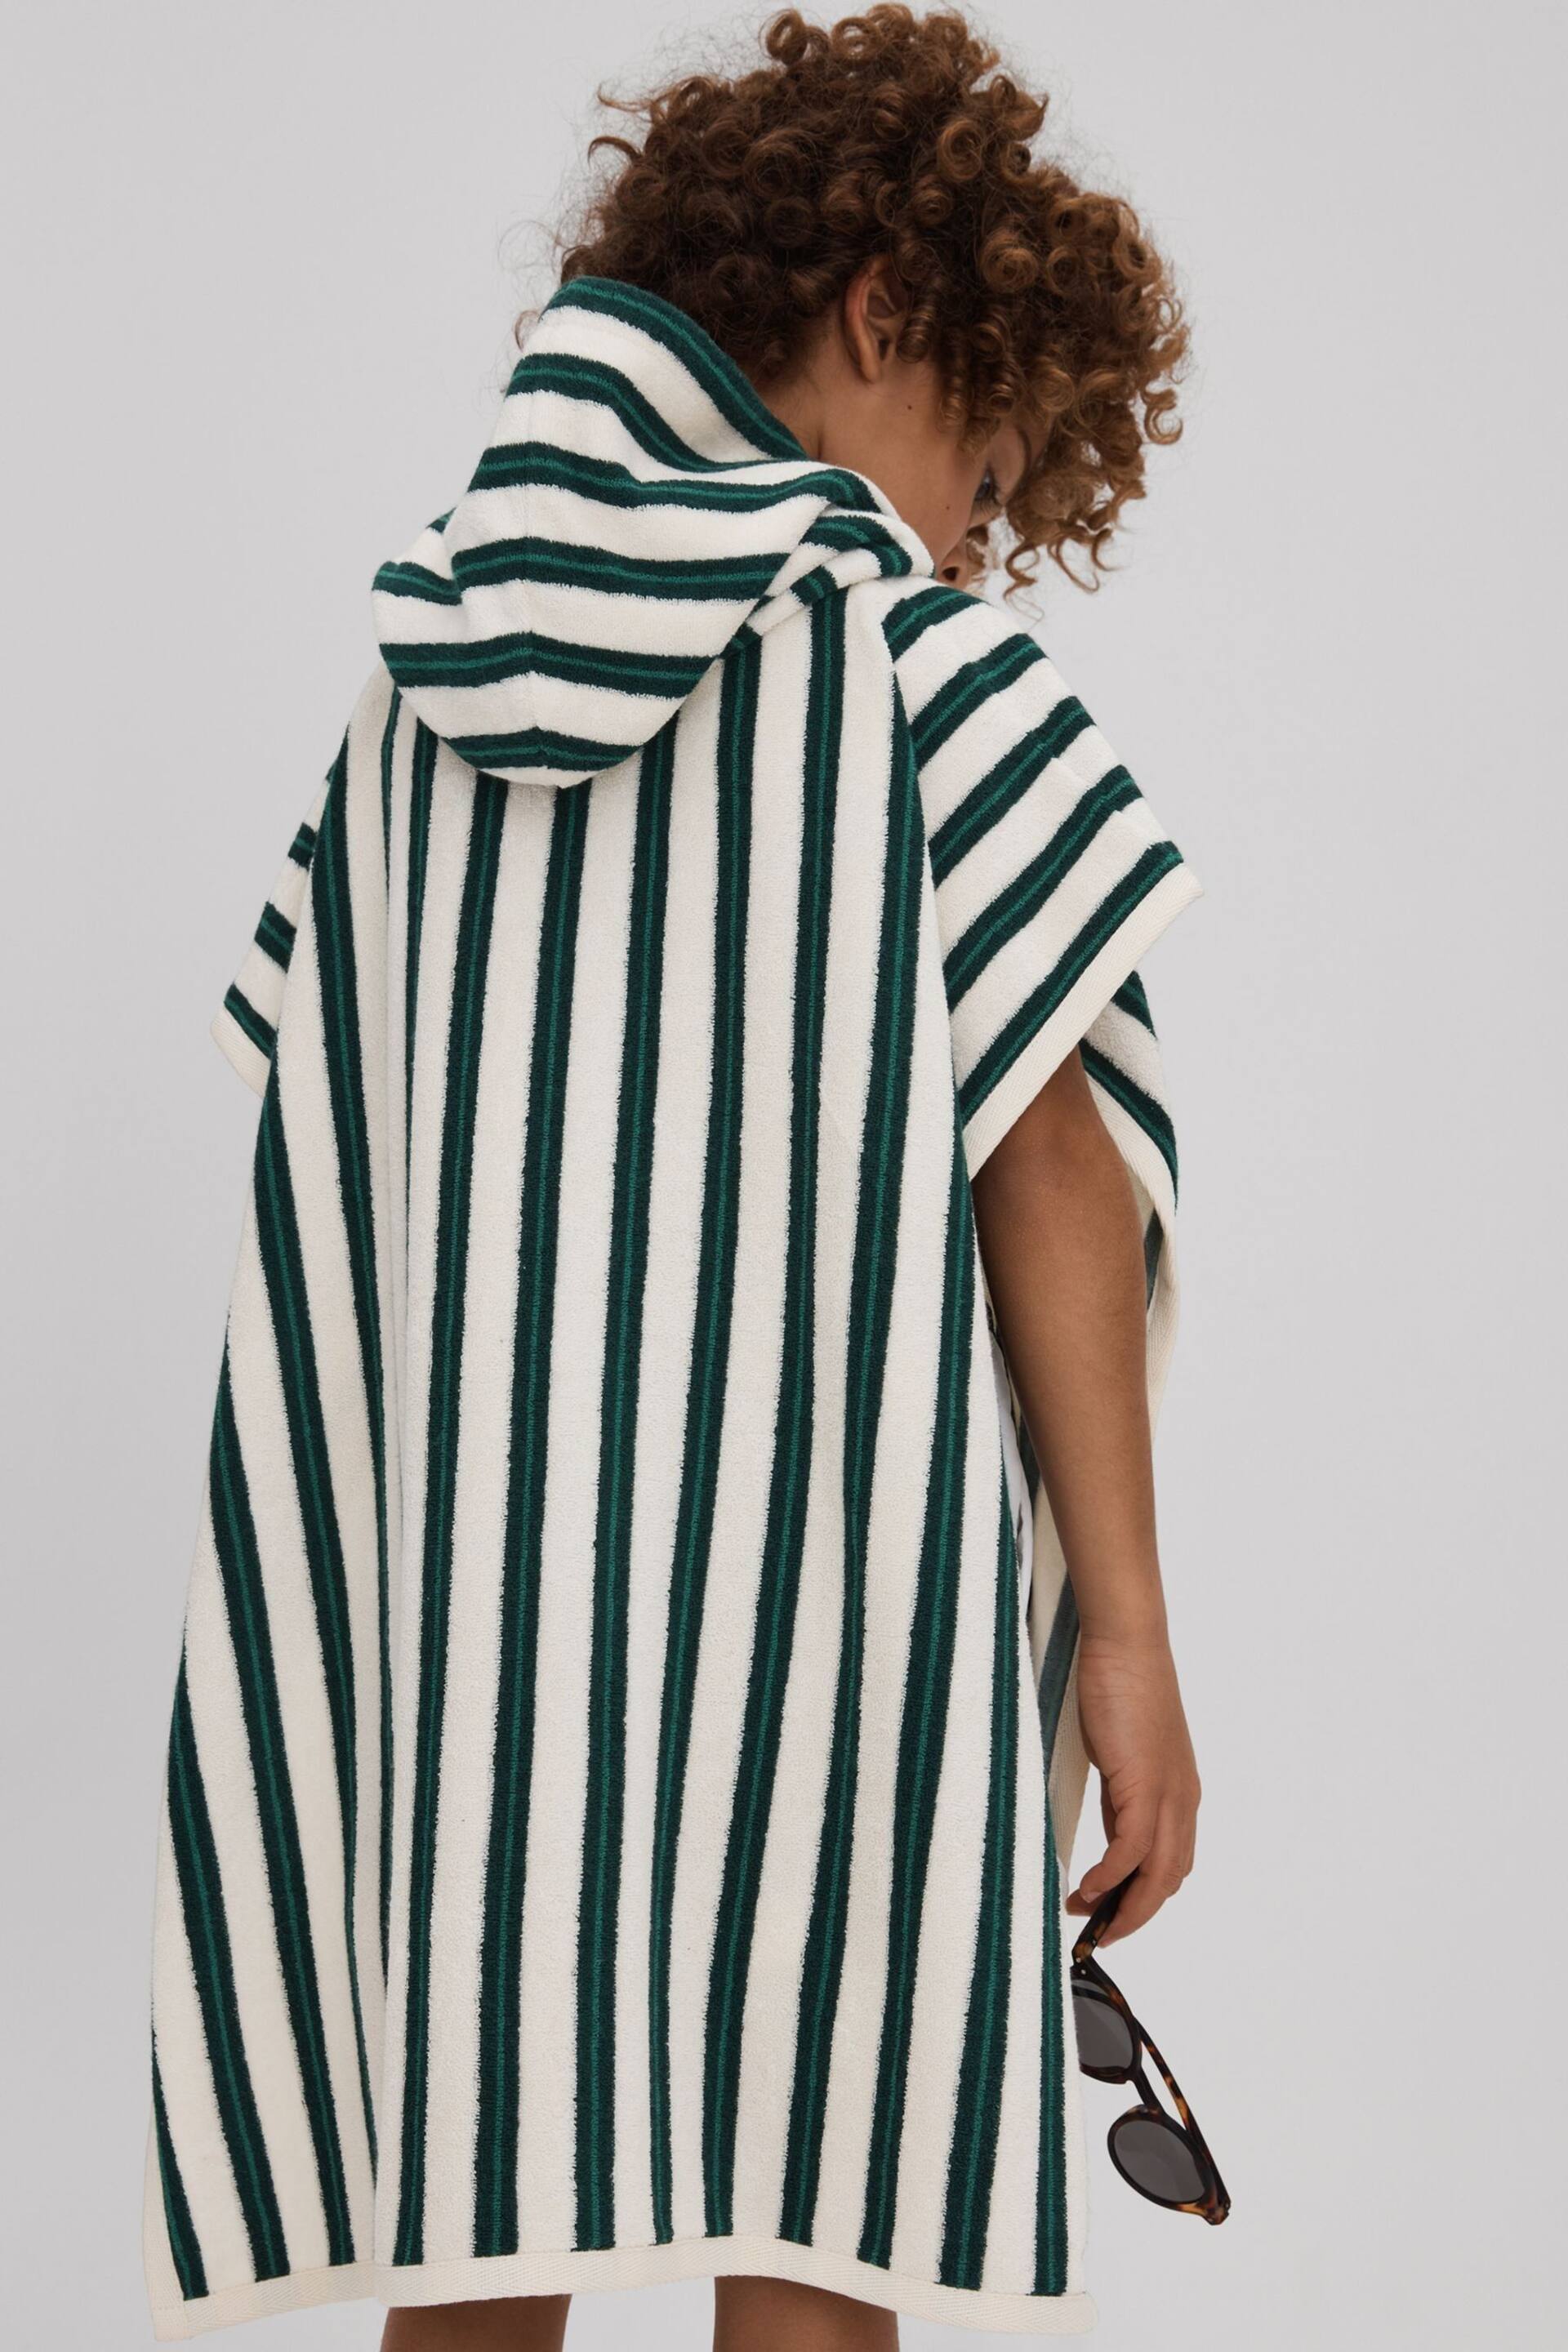 Reiss Green/White Ray Hooded Striped Poncho - Image 3 of 4